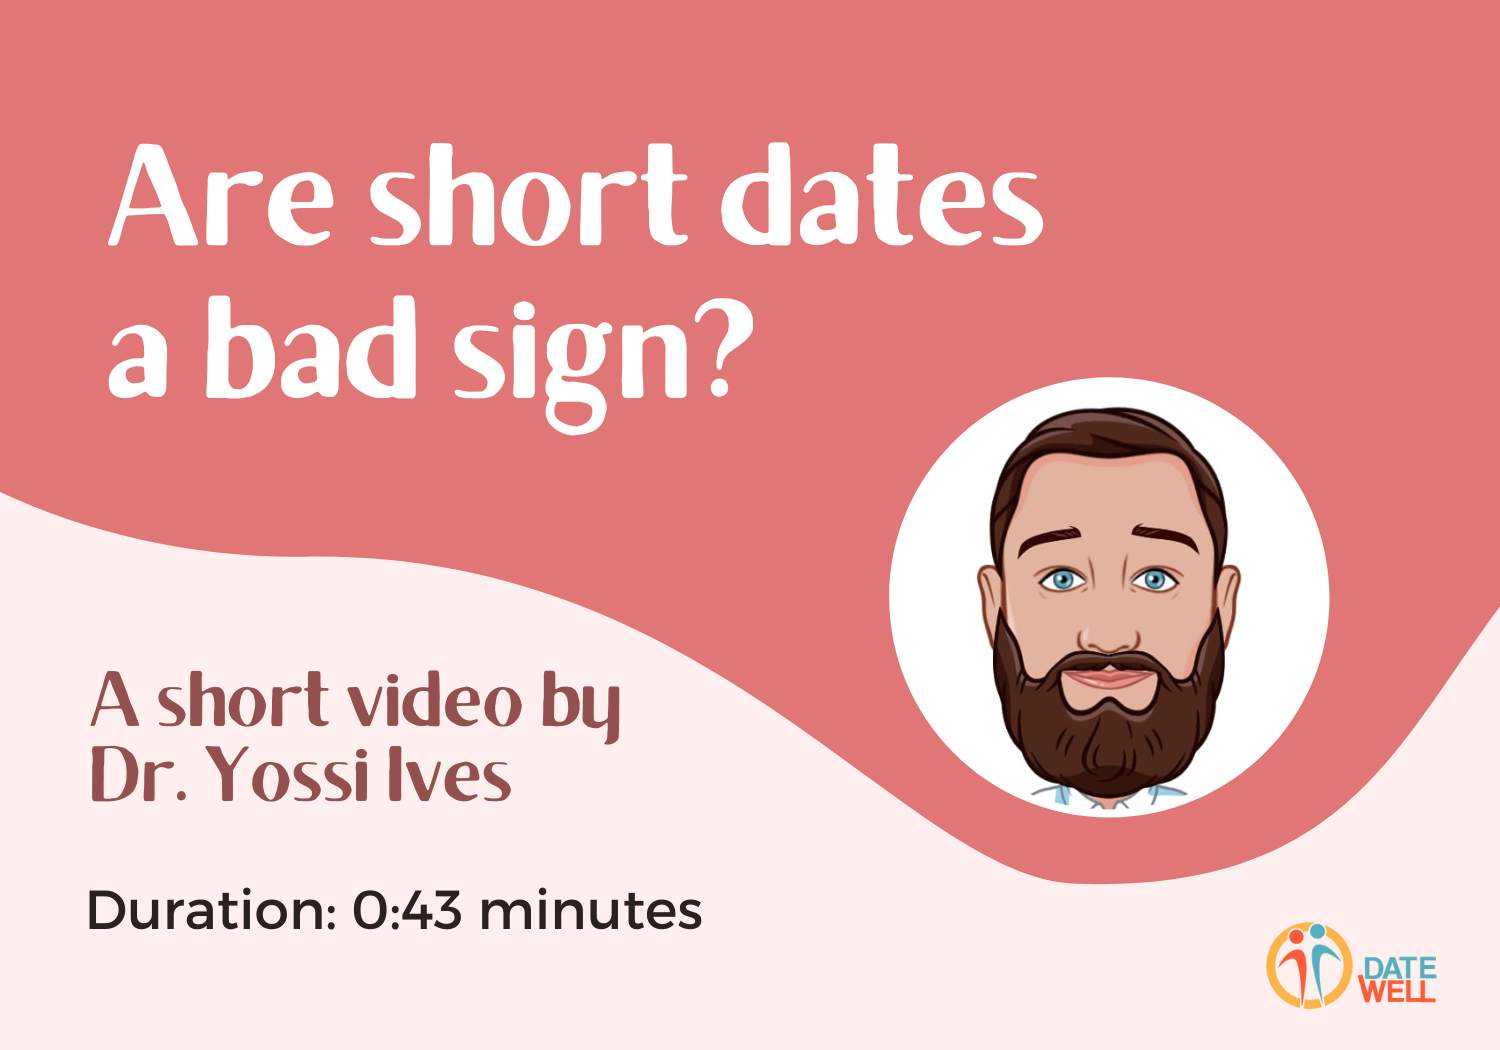 Are short dates a bad sign?